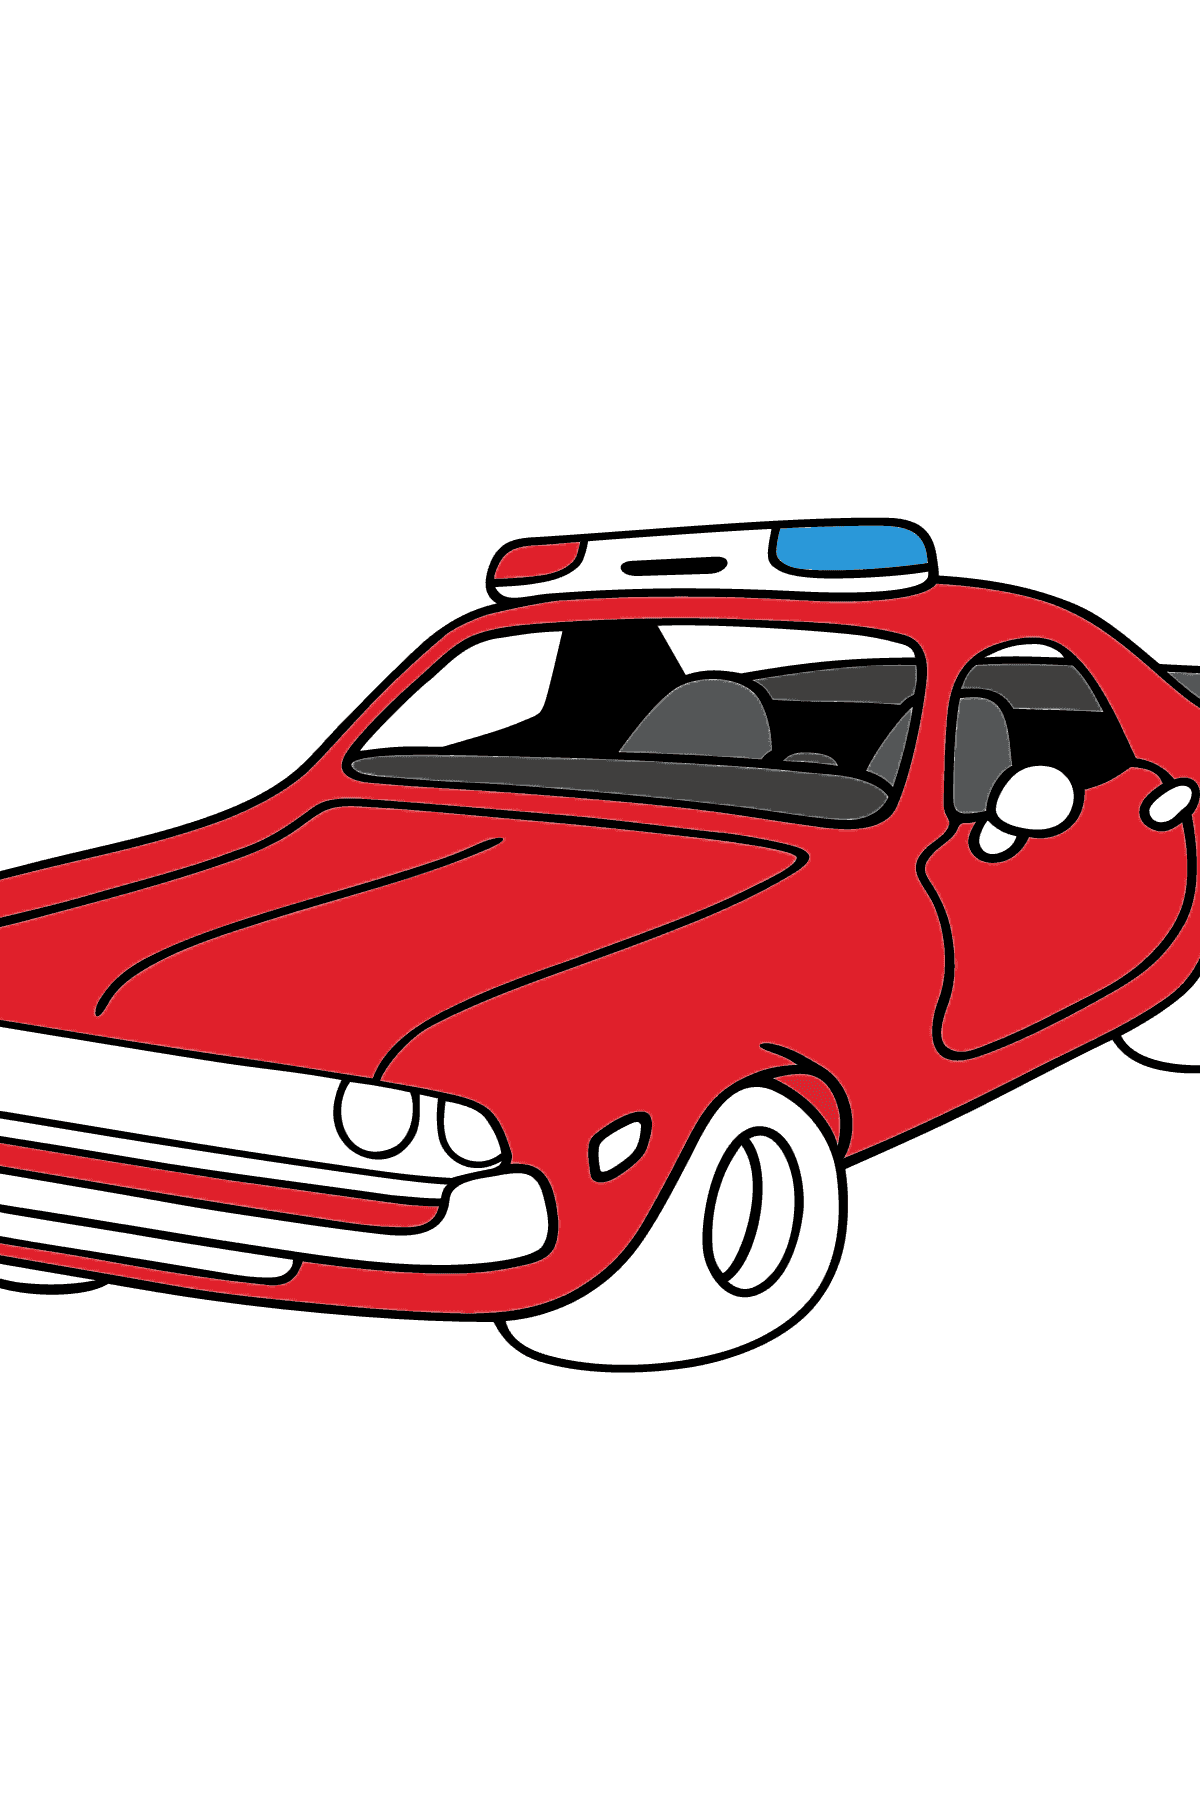 Coloring Page - A Red Police Car for Children 